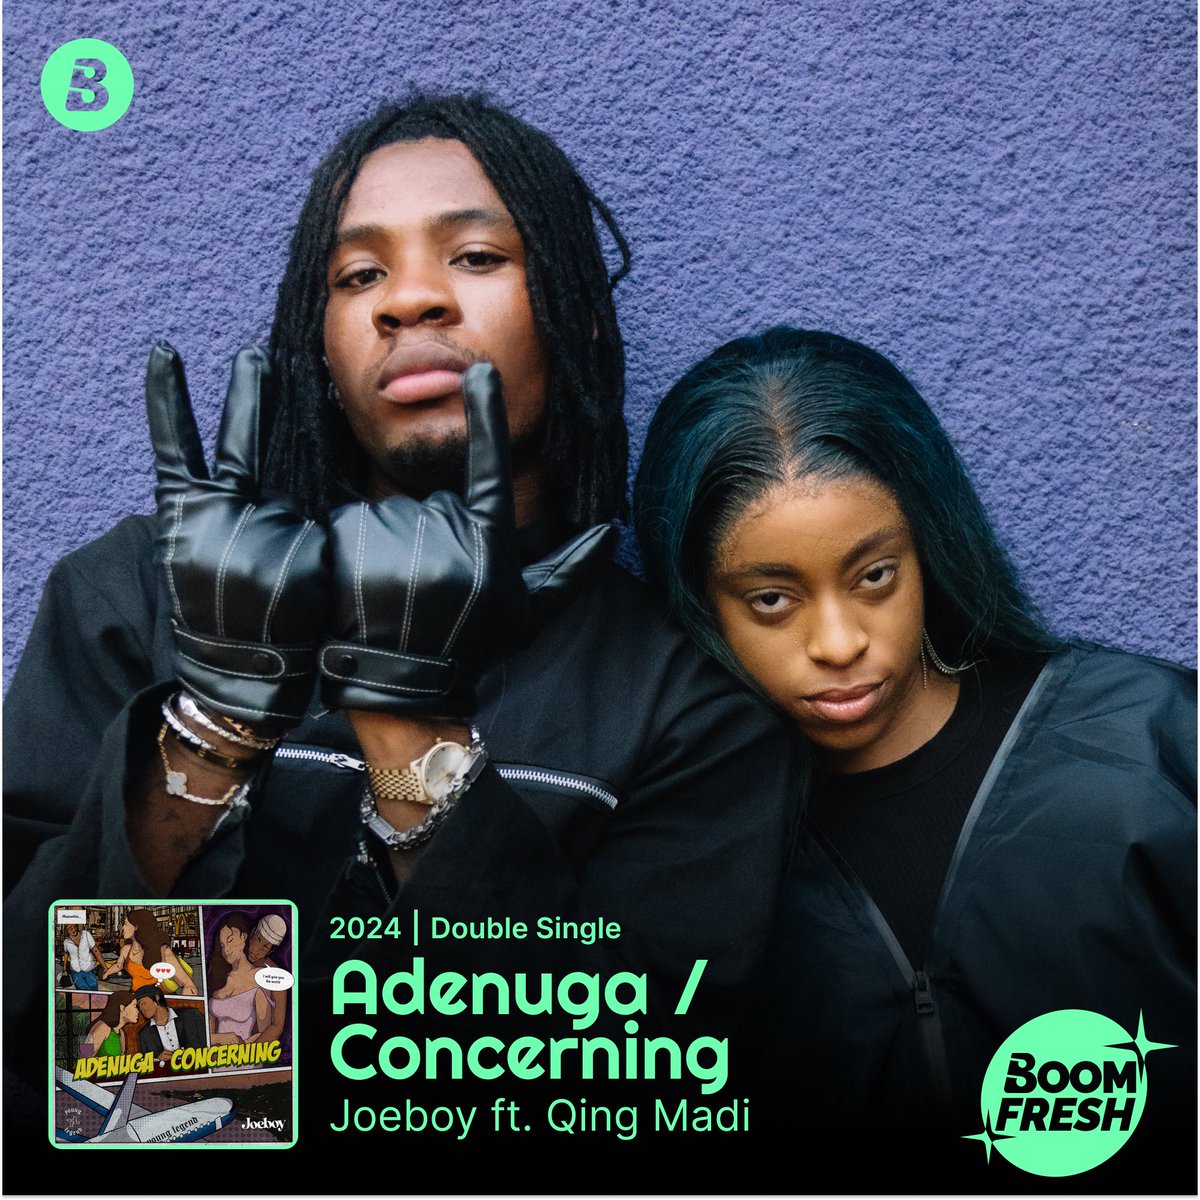 Another @younglegend4l special! 🤩 @joeboyofficial’s #Adenuga ft @qingmadi & #Concerning OUT NOW! 🔥🌹 Go listen on Boomplay! ➡️ Boom.lnk.to/JoeboyAdenugaC… #BoomFresh #HomeOfMusic